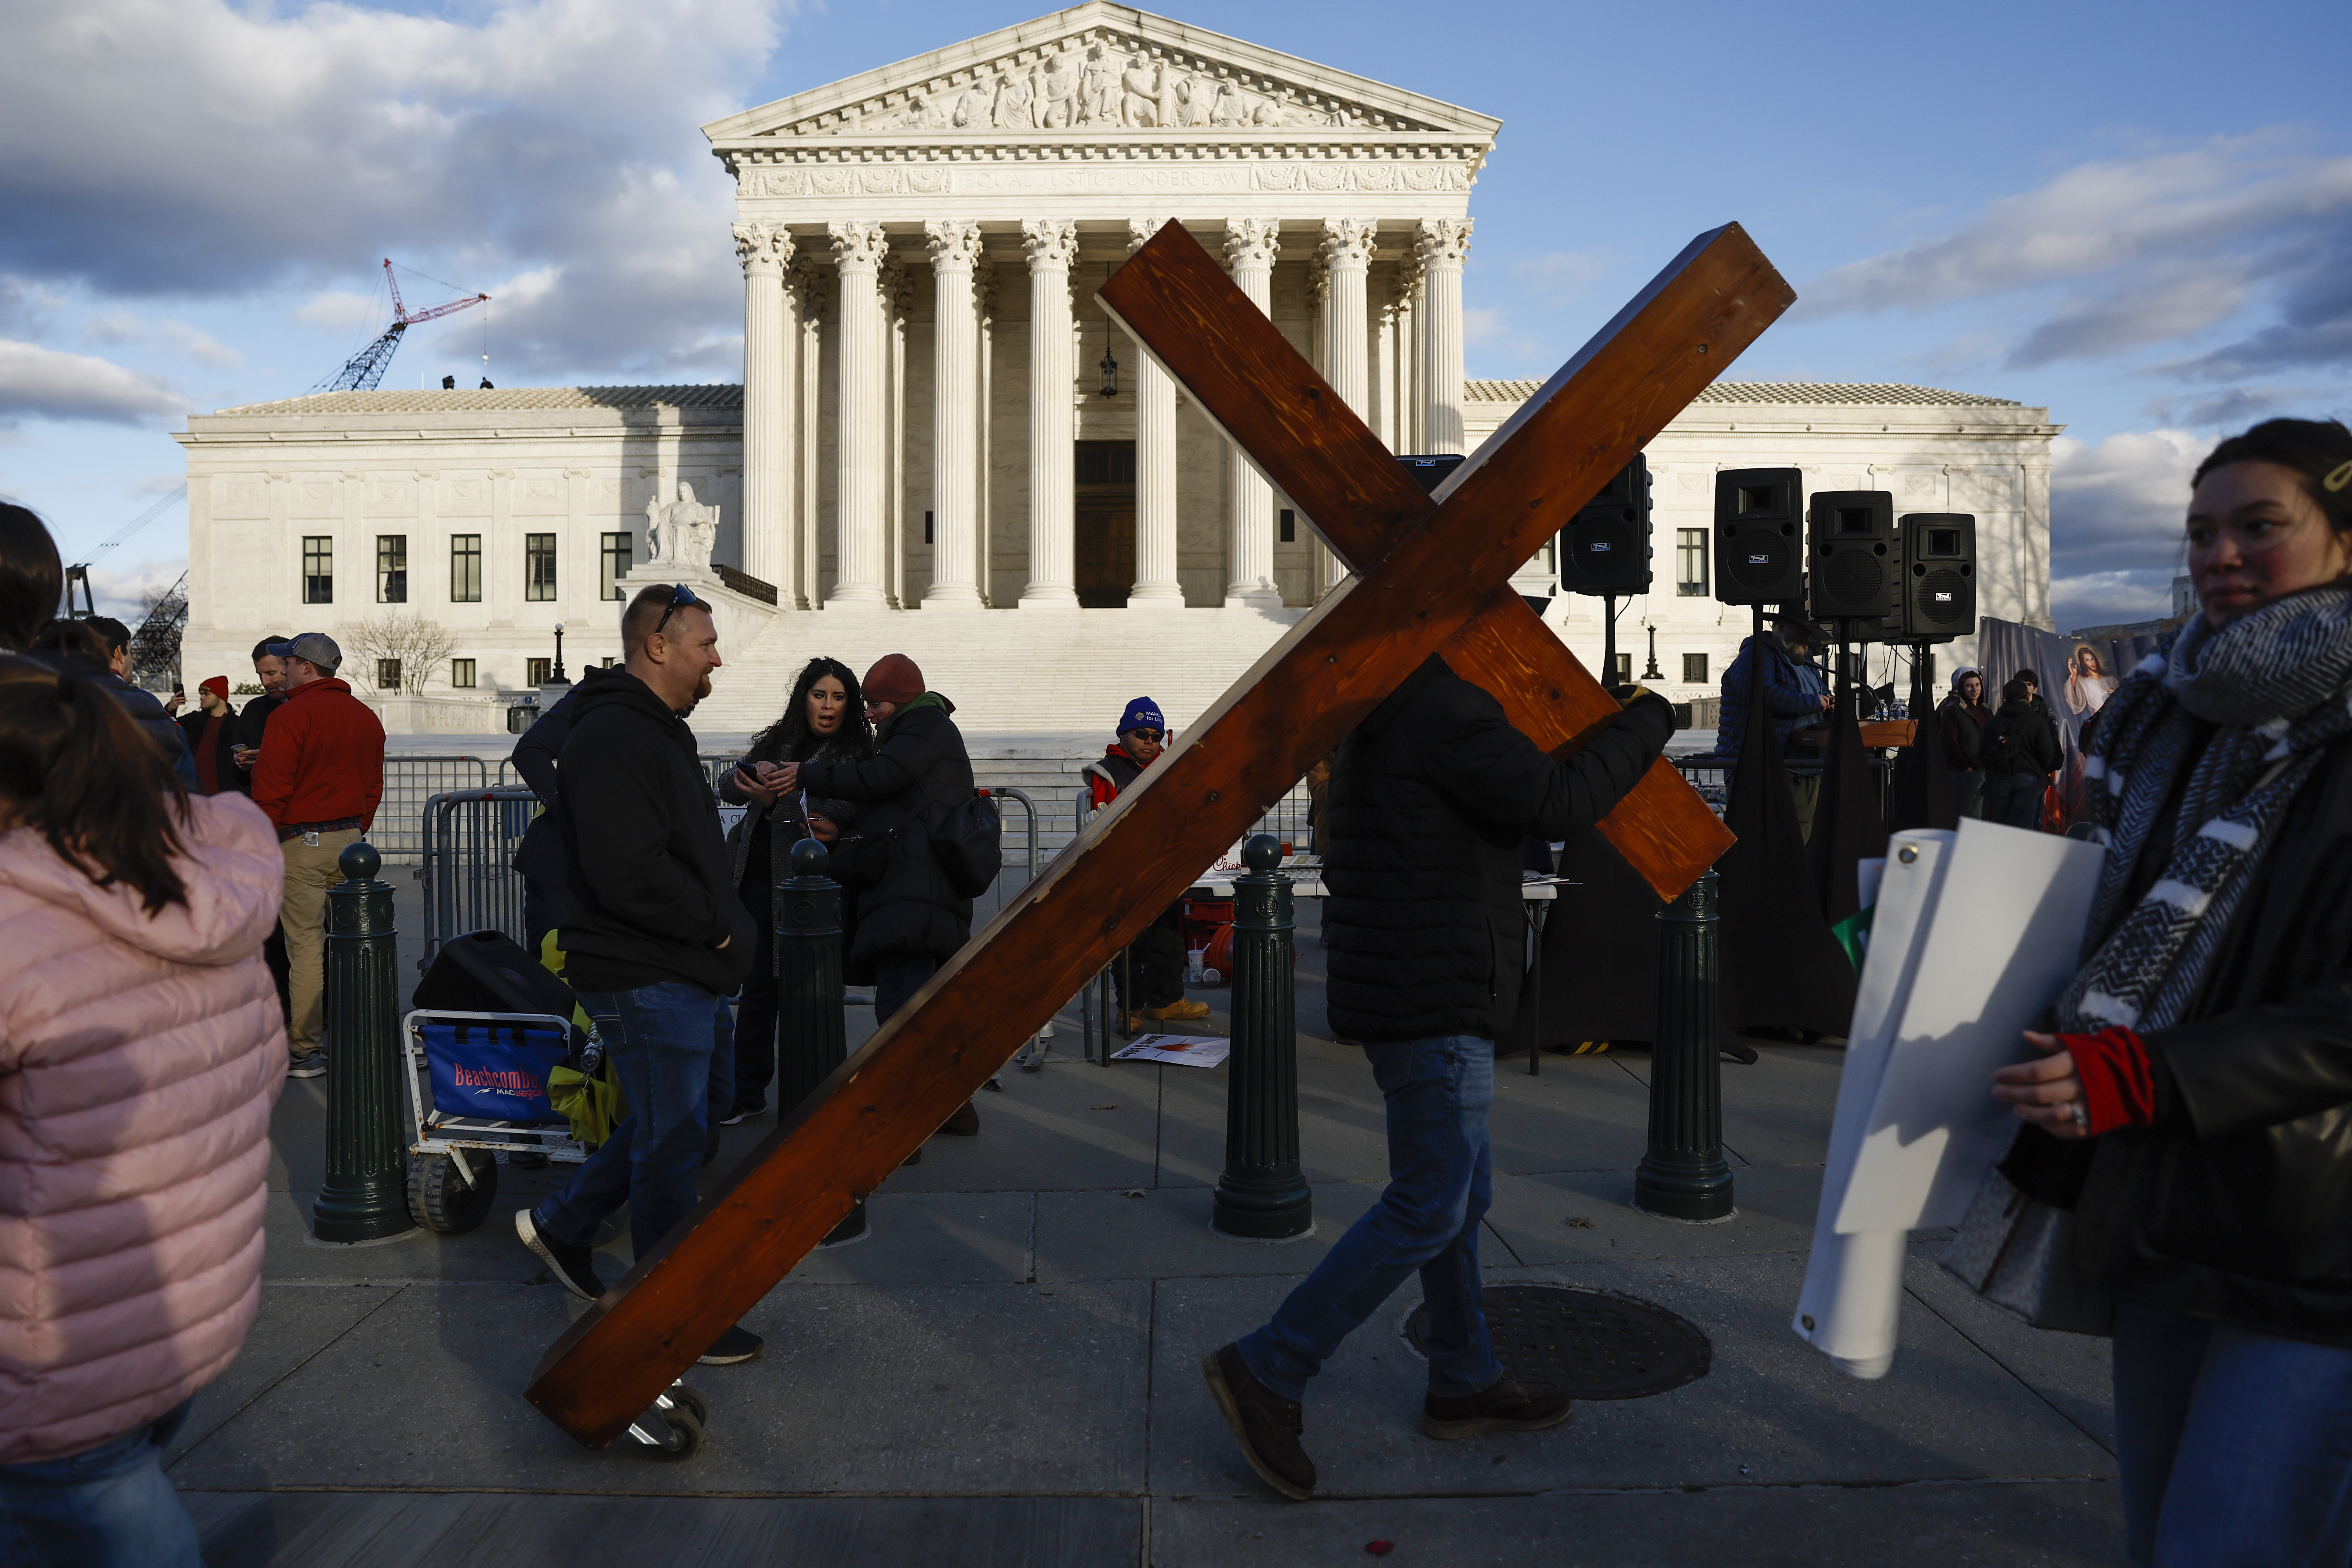 A person carrying a huge Christian cross at a protest in front of the Supreme Court building.